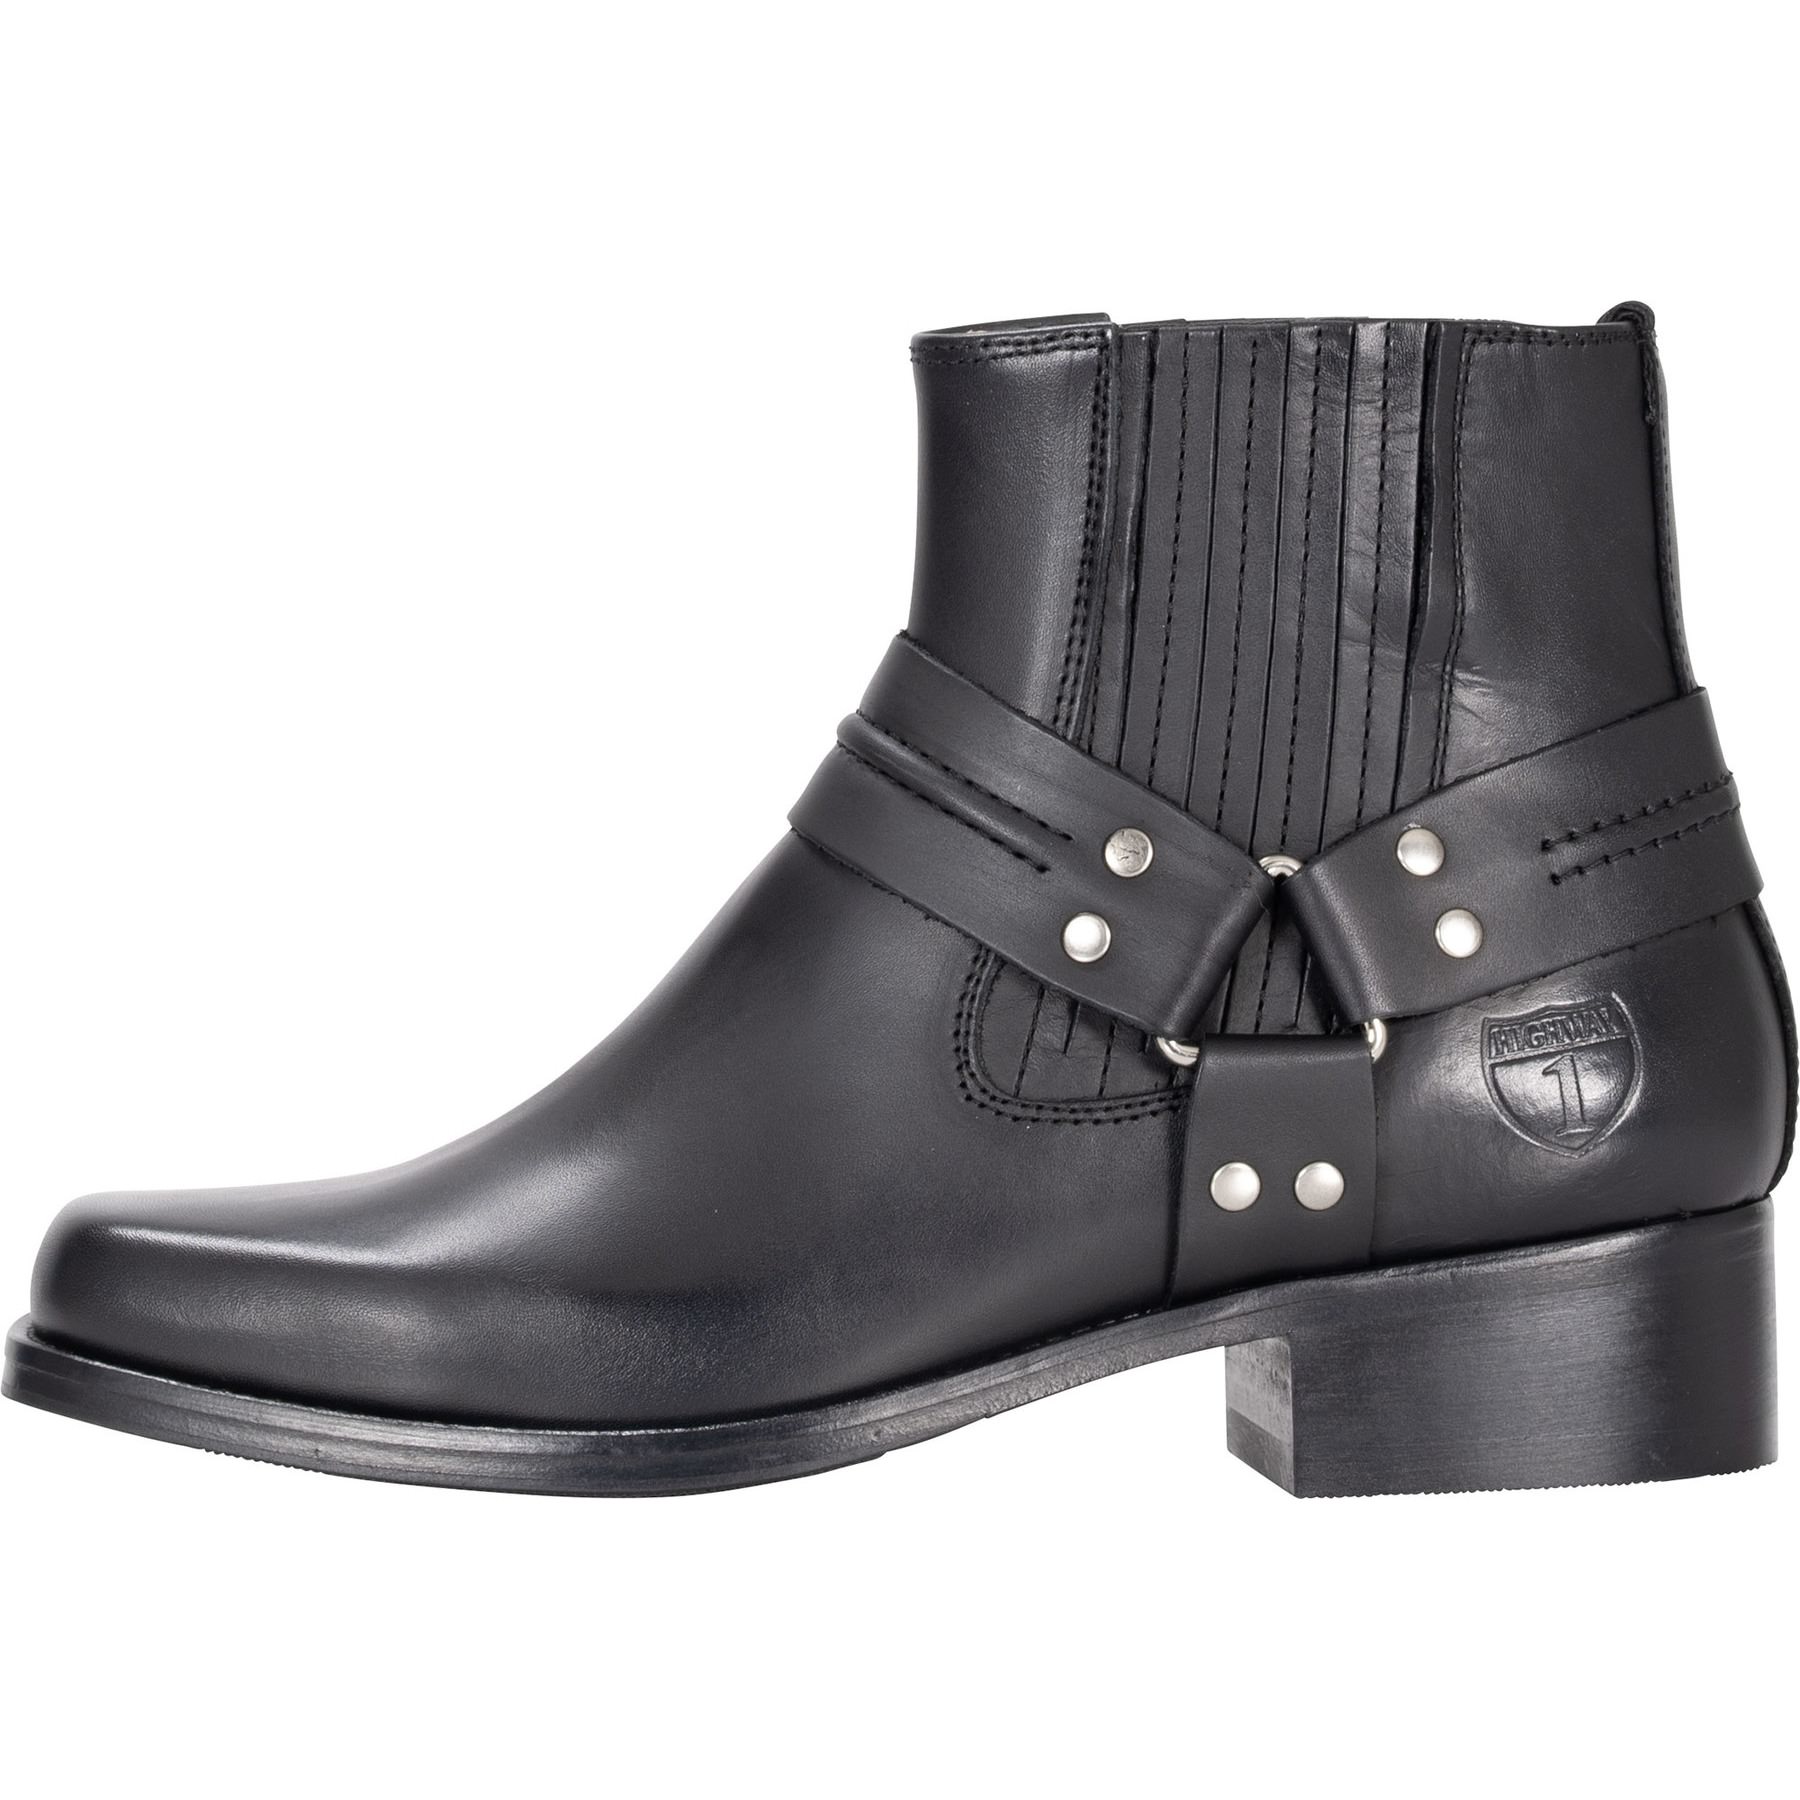 Buy Highway 1 Western Boots Louis Motorcycle Clothing And Technology